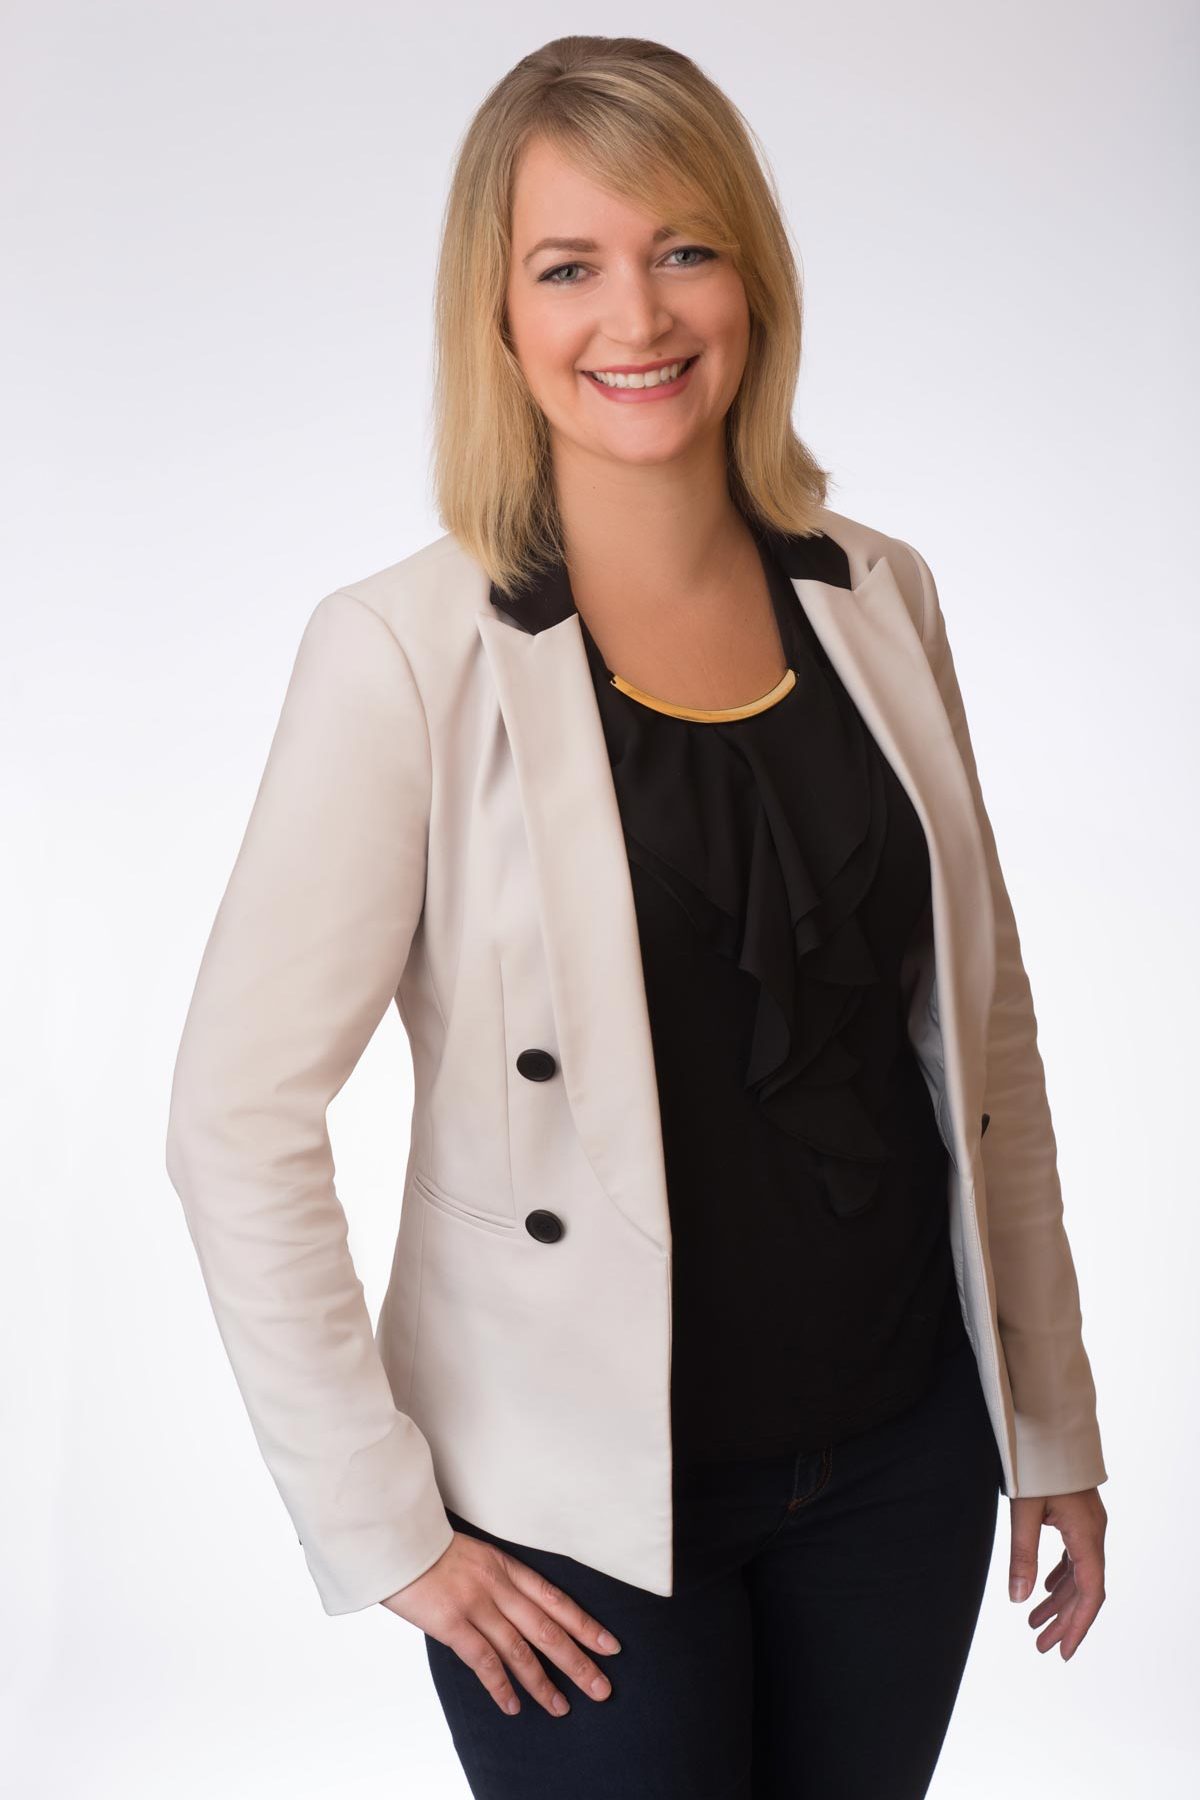 Erin McNeill, Lawyers Vancouver, LK Law